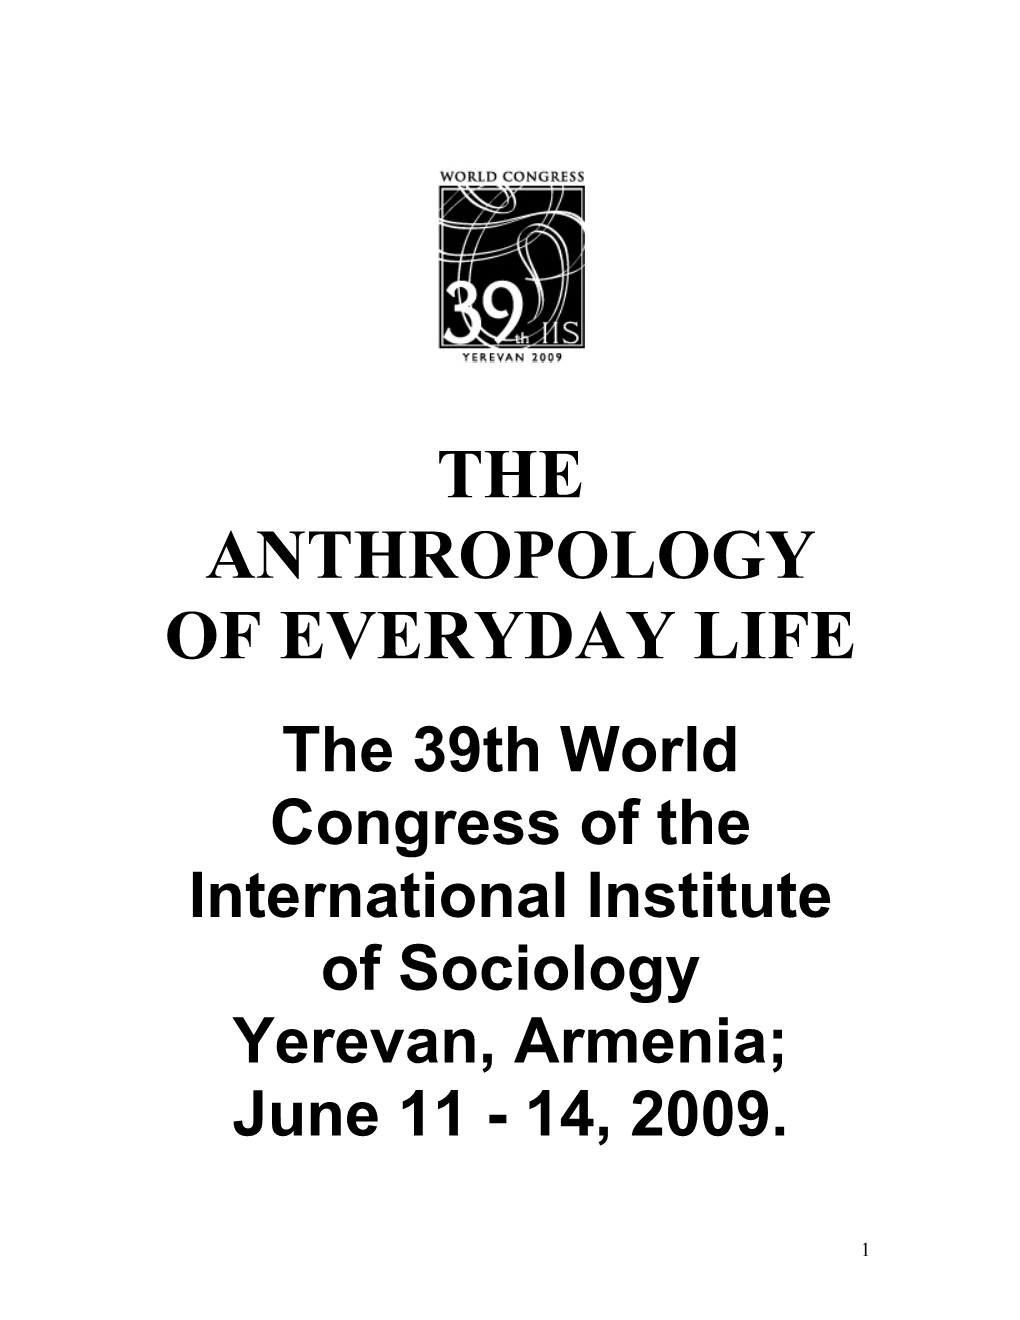 The Anthropology of Everyday Life